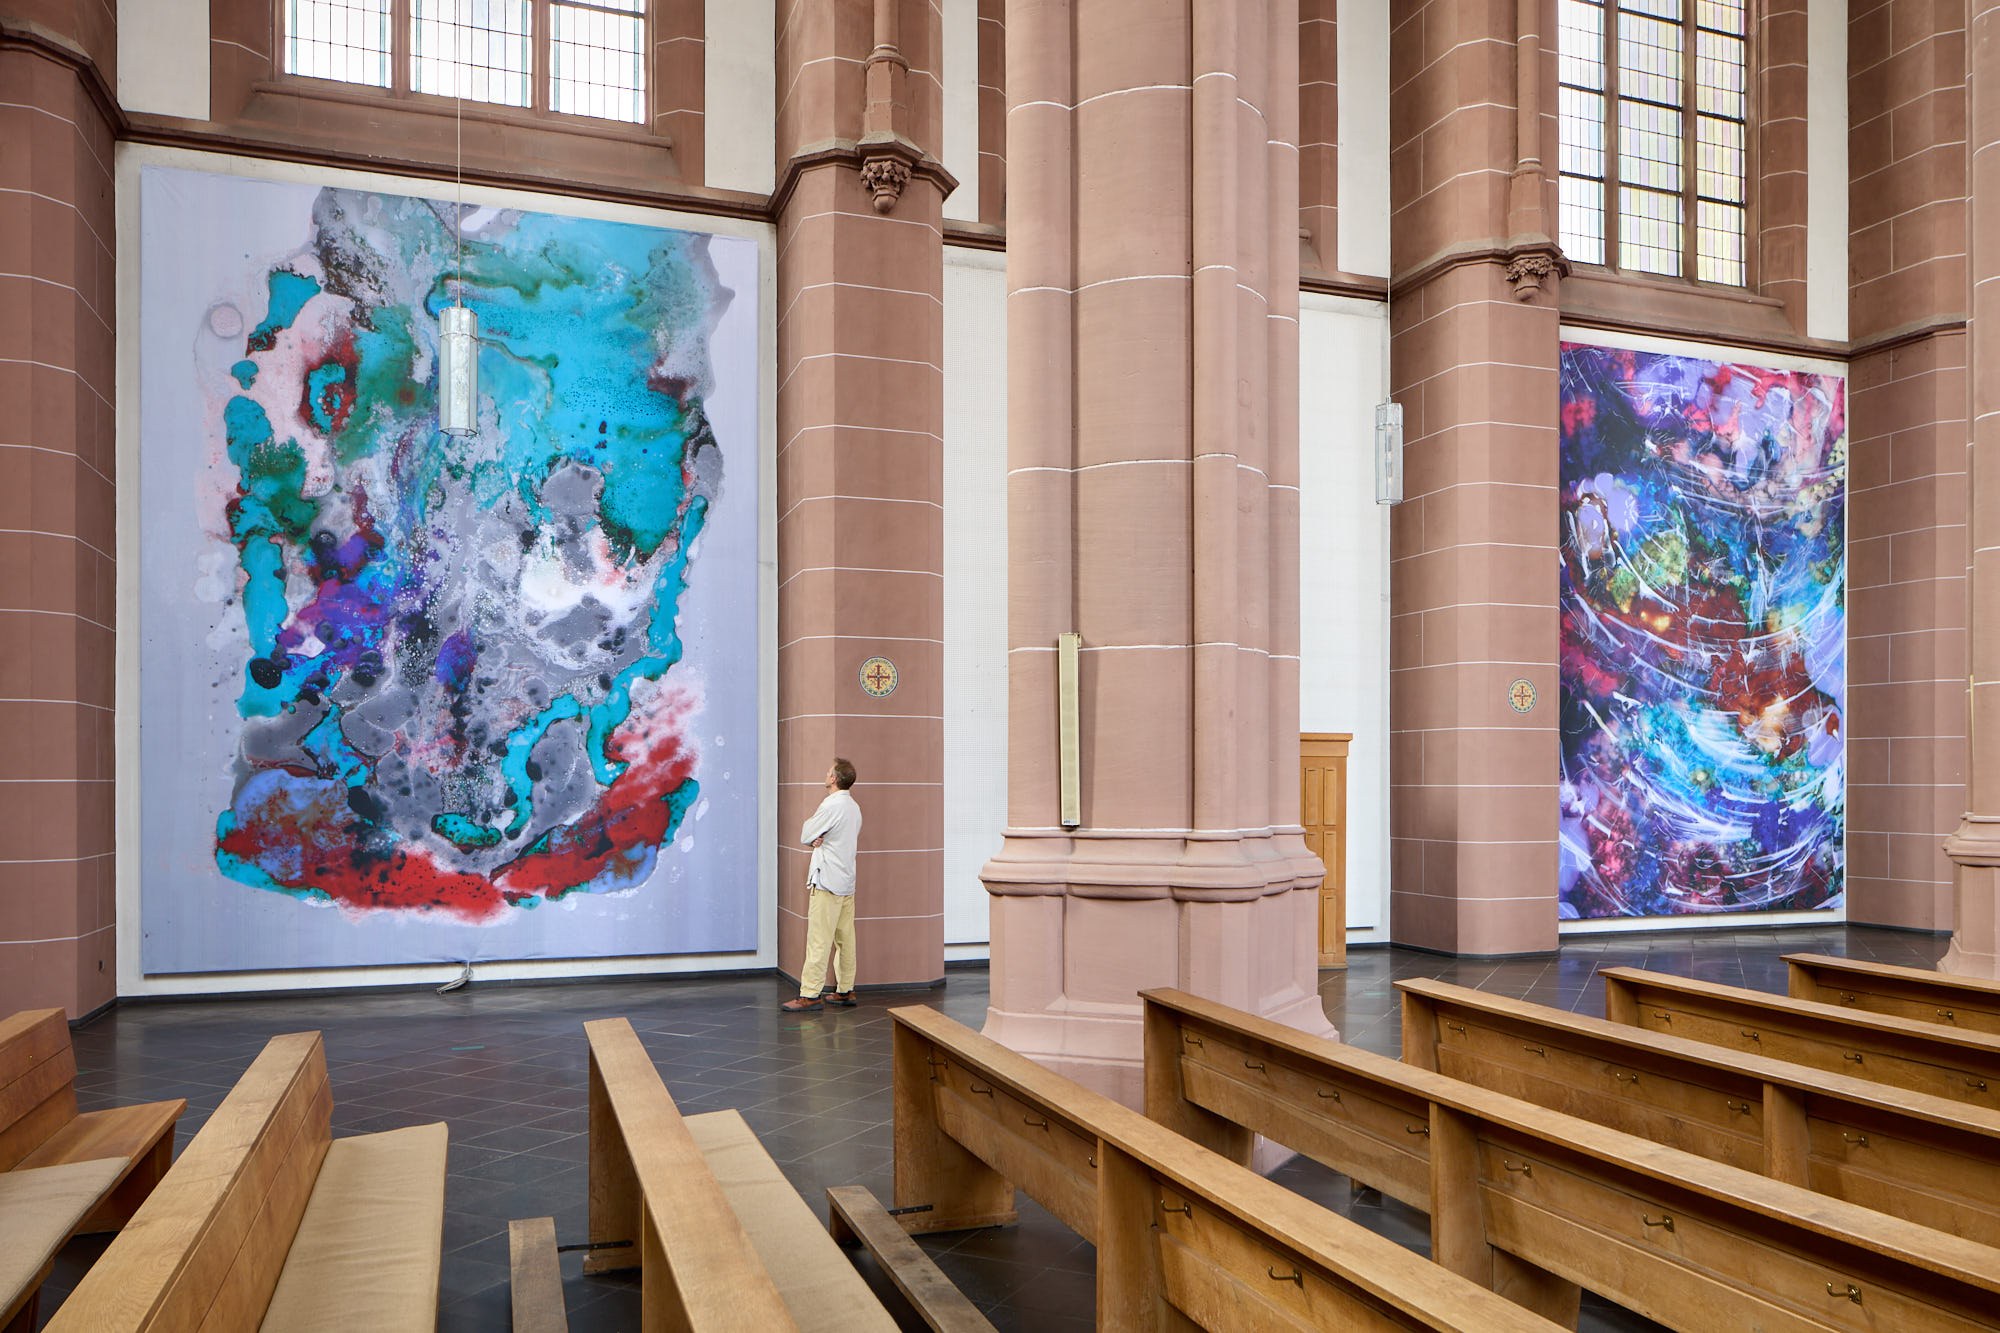 Vitamin E110 and Sweet Galaxy, 2022, print on fabric, 600 x 470 cm each, installation view at St. Agnes Cologne